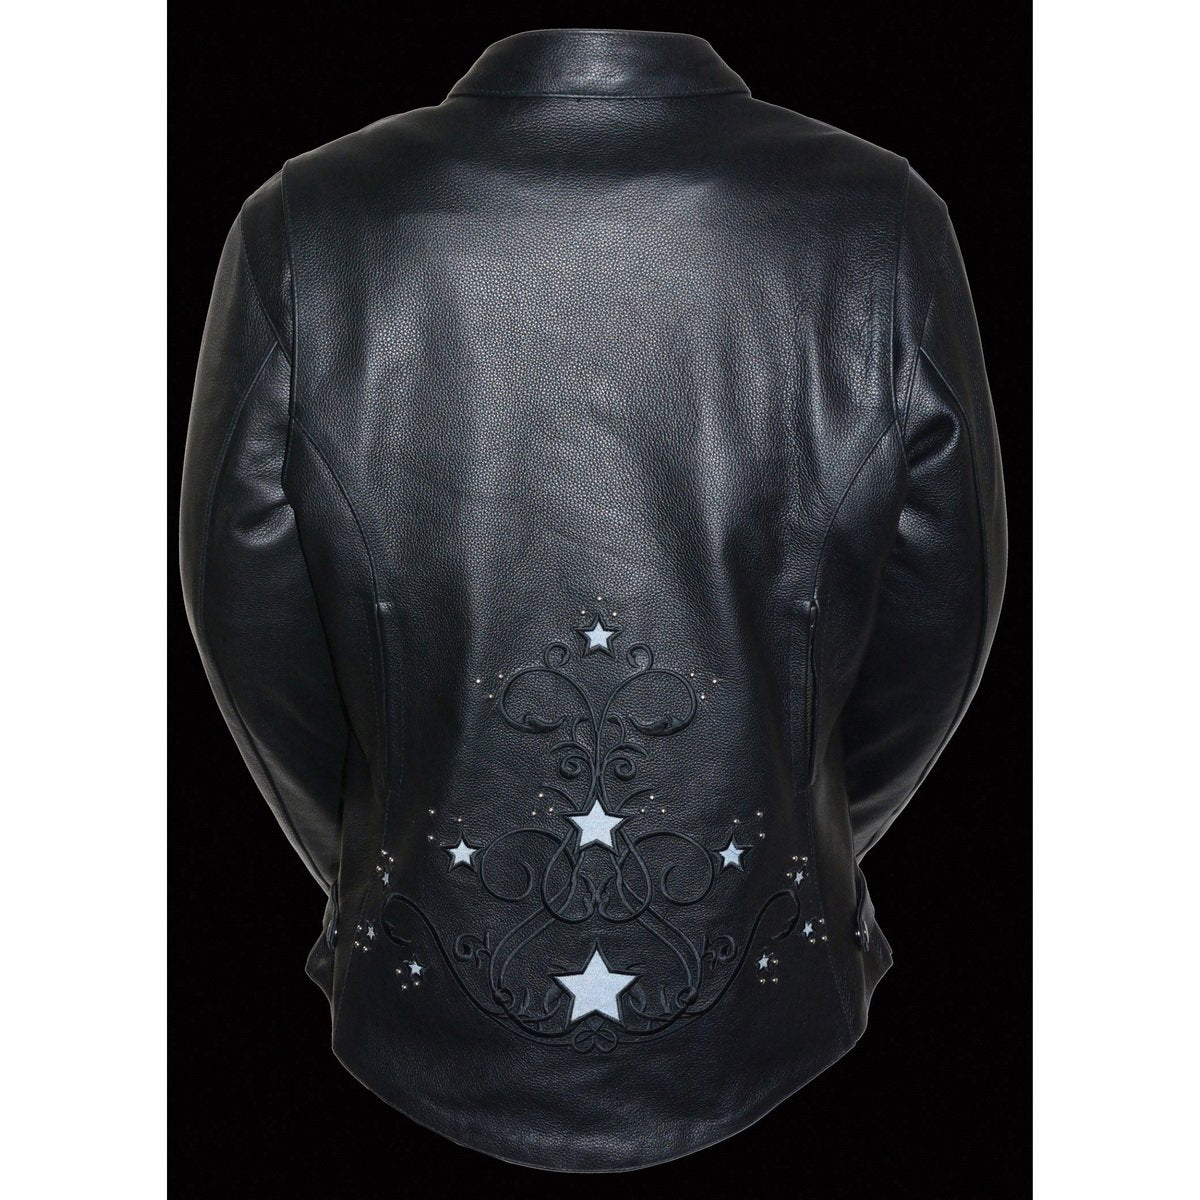 Milwaukee Leather ML2500 Women's Reflective Star Riveted Black Leather Jacket